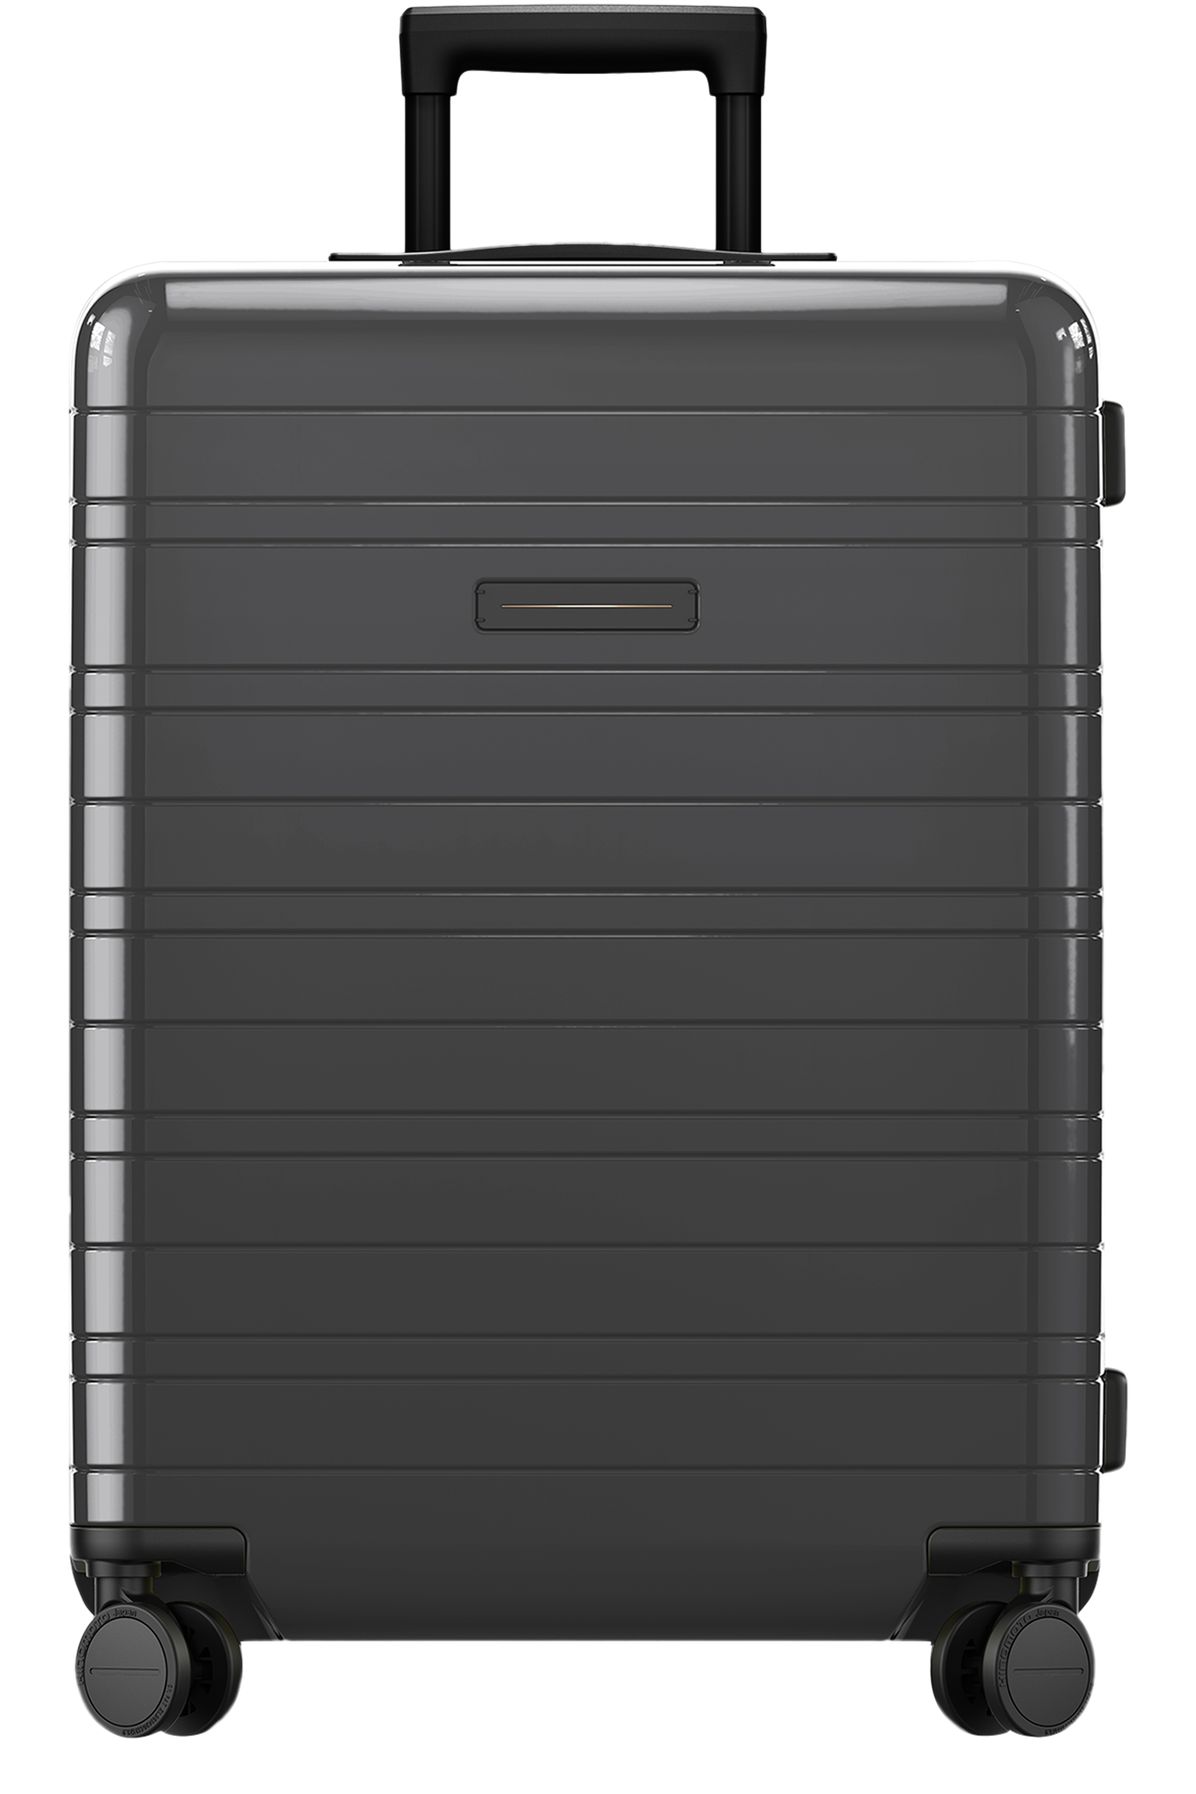 Horizn Studios H6 Essential Glossy Check-In luggage (65,5L)